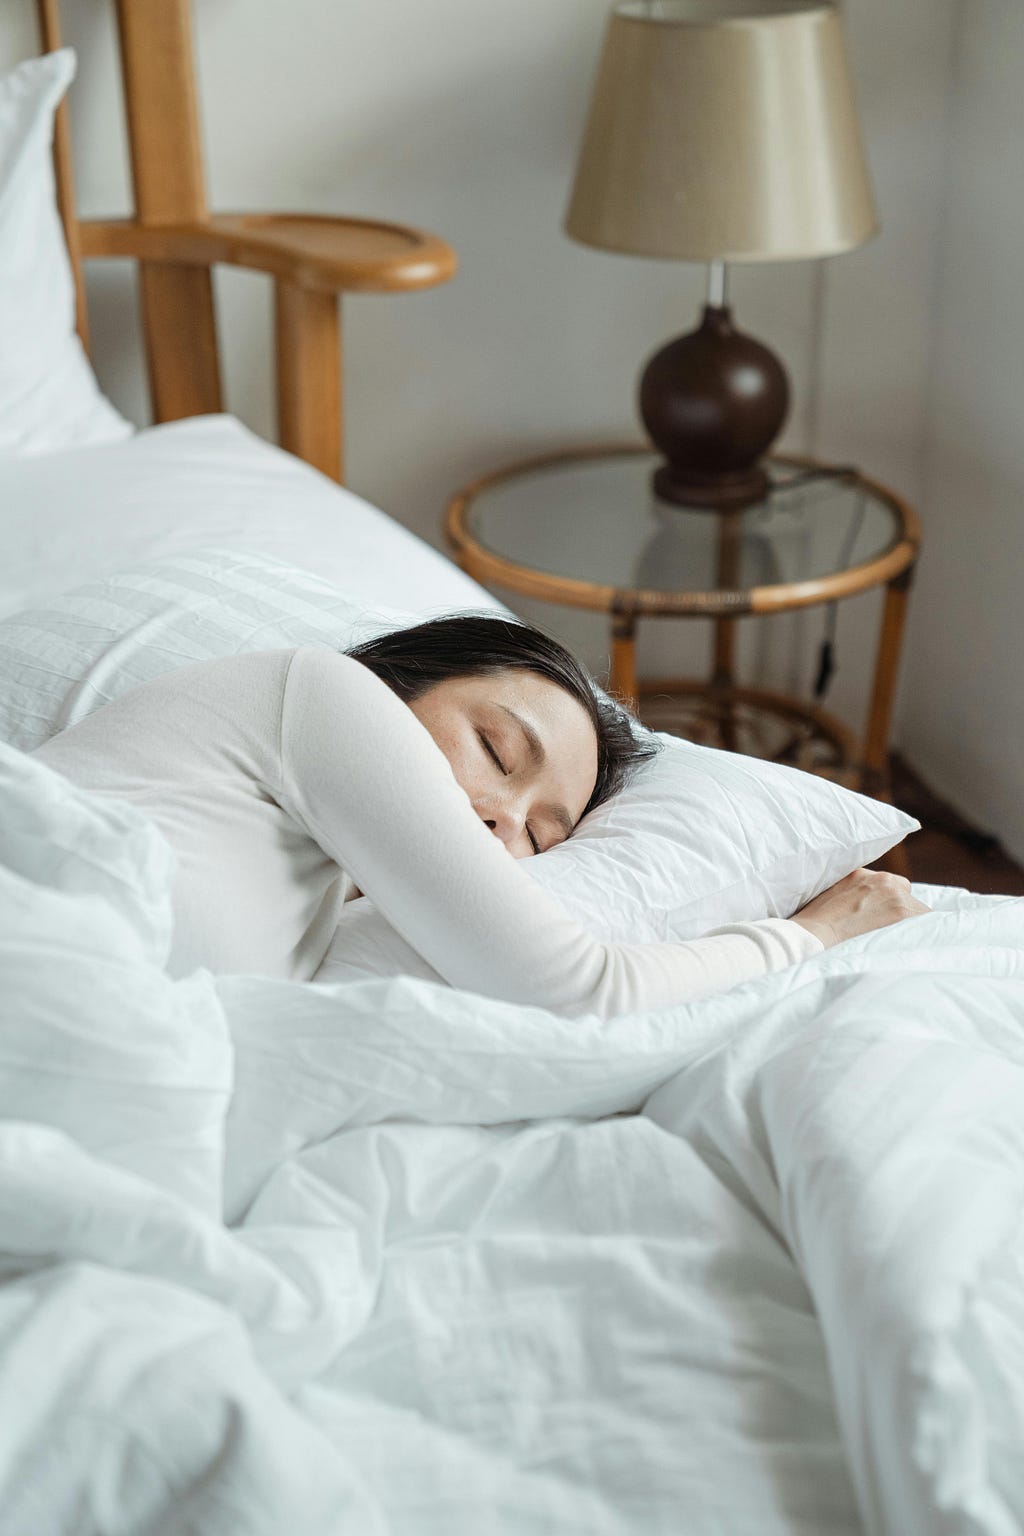 image of woman looking very comfortable asleep in her bed